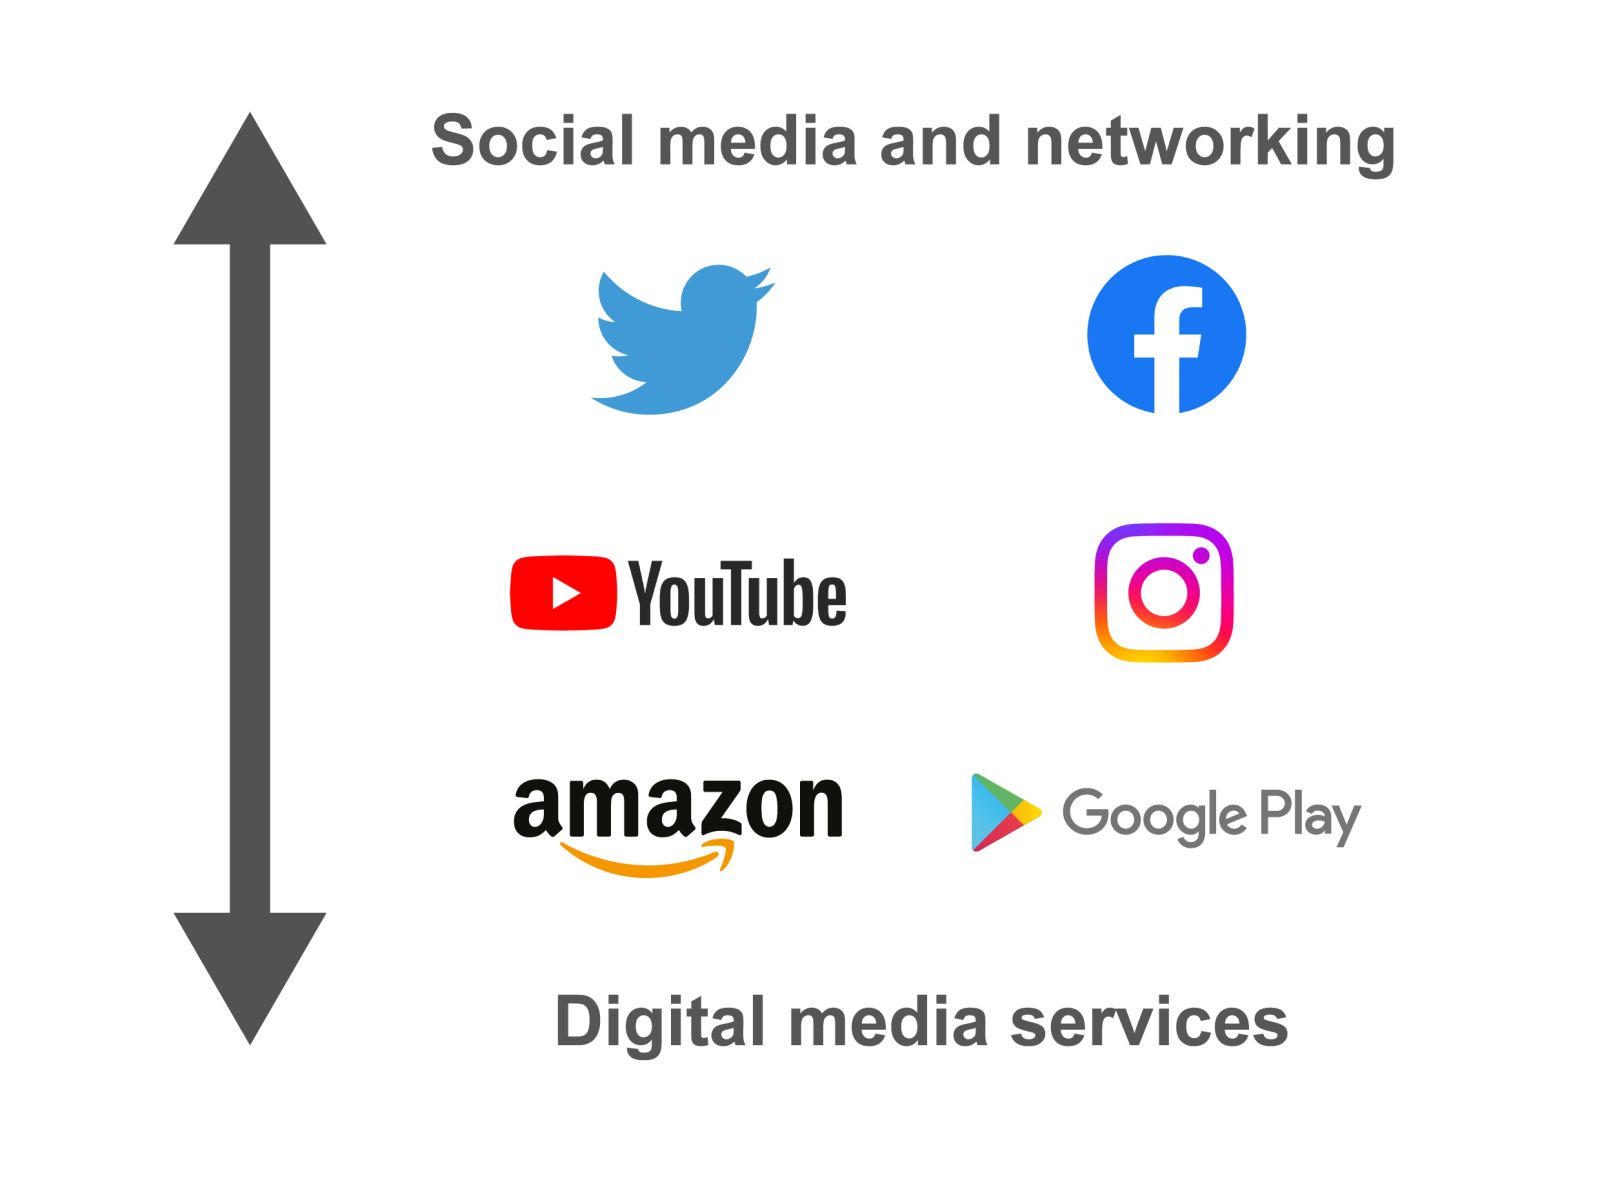 Third-party sites are shown on a continuum, from 'social media and networking' to 'digital media services'.  Twitter and Facebook closest to 'social media and networking'; YouTube and Instagram in the middle; Amazon and Google Play closest to 'digital media services'.